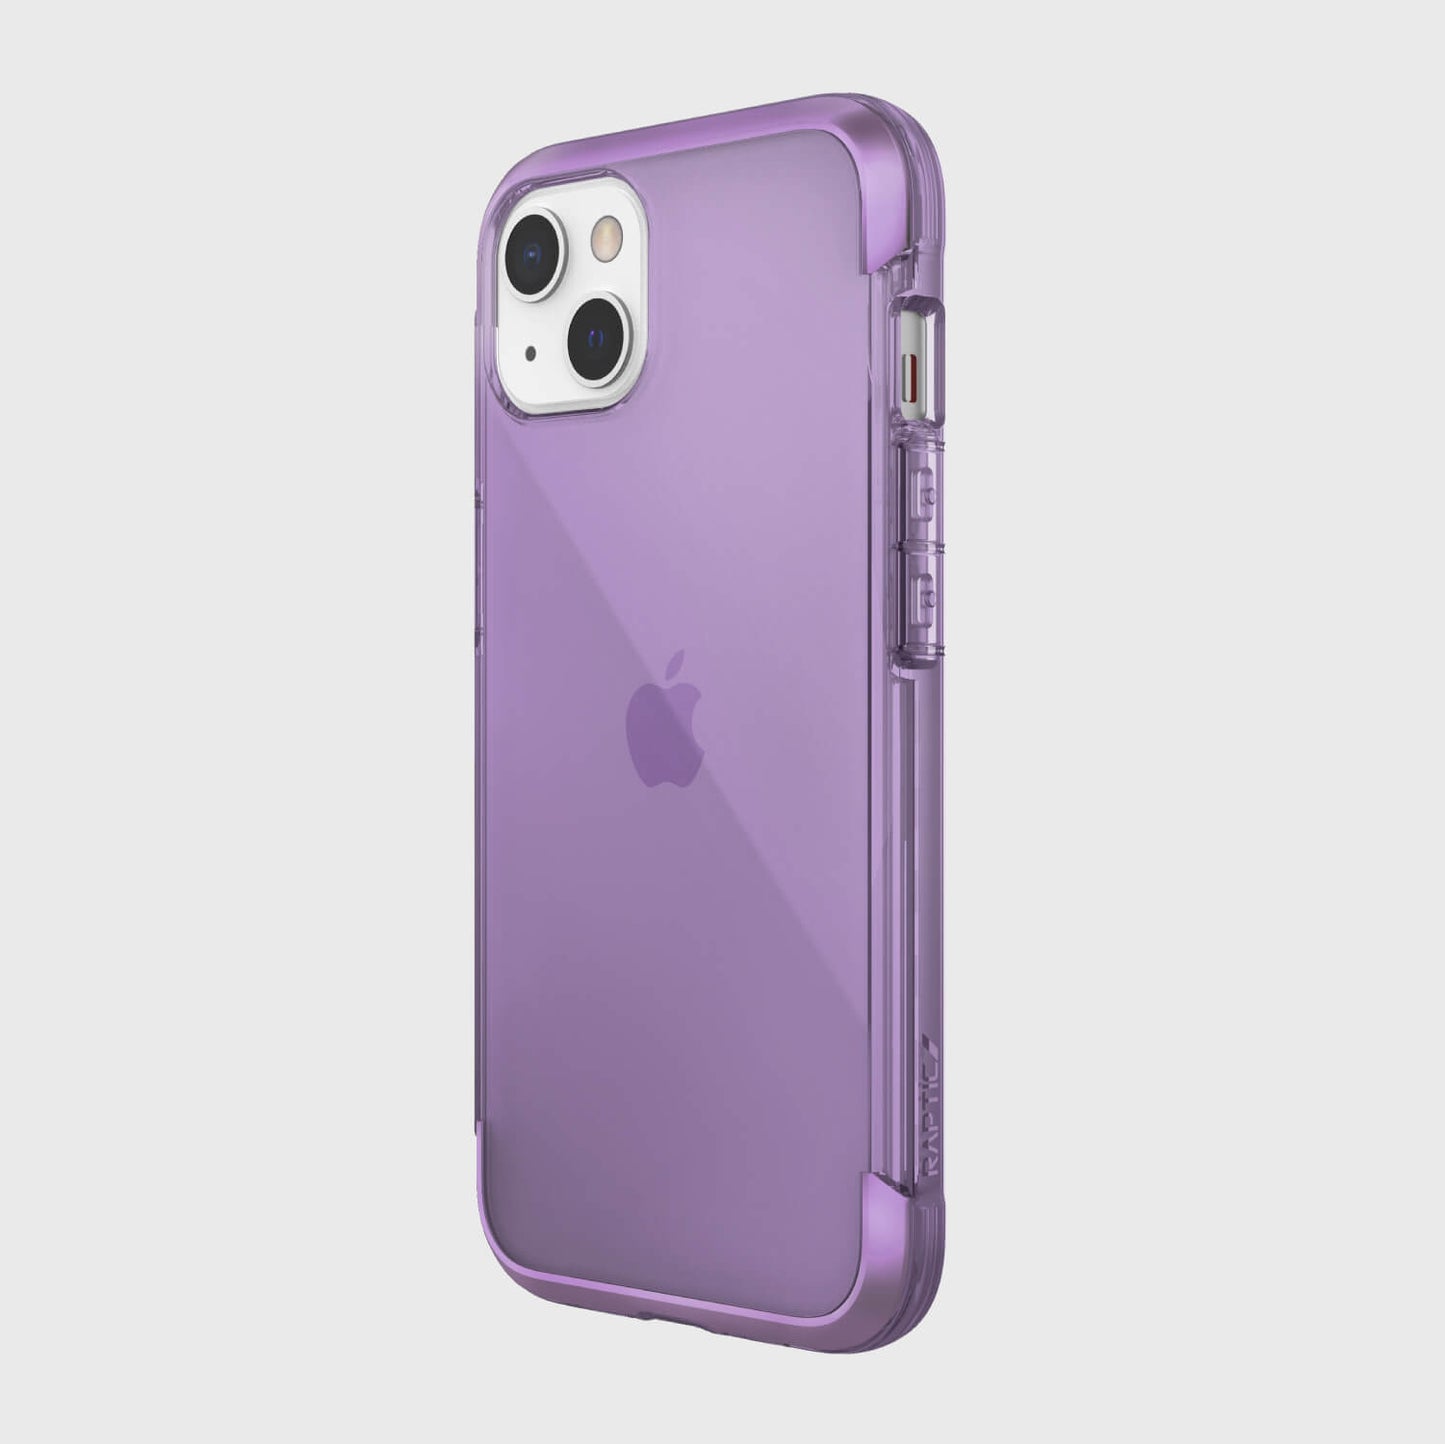 The drop-proof purple iPhone 13 case with wireless charging compatibility from Raptic.